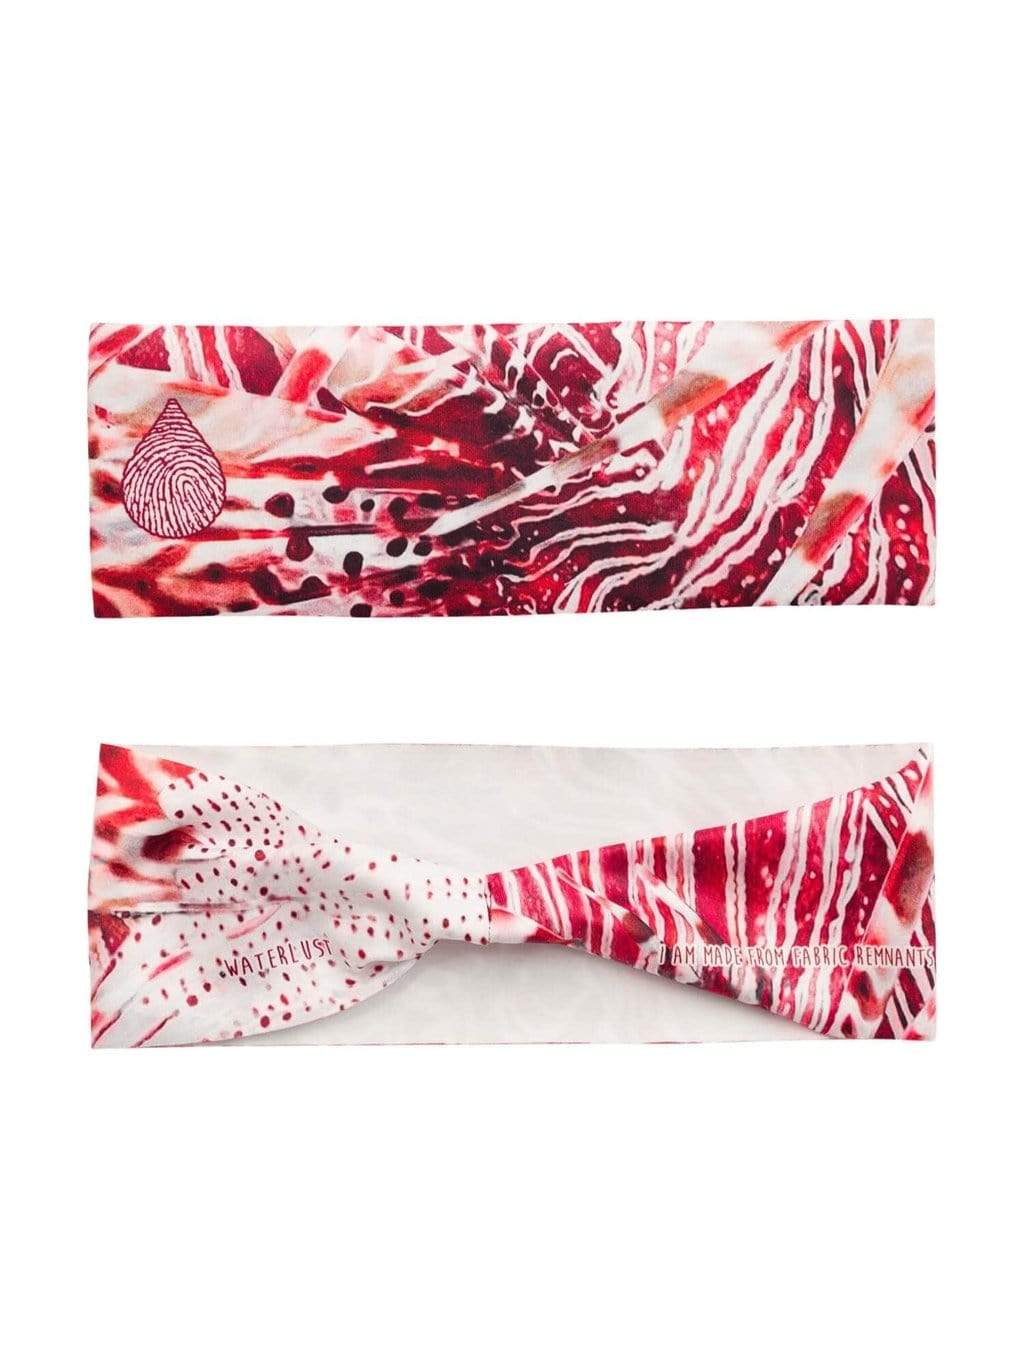 Waterlust Printed Headband Made From Pre-Consumer Waste - Invasive lionfish, front and back view